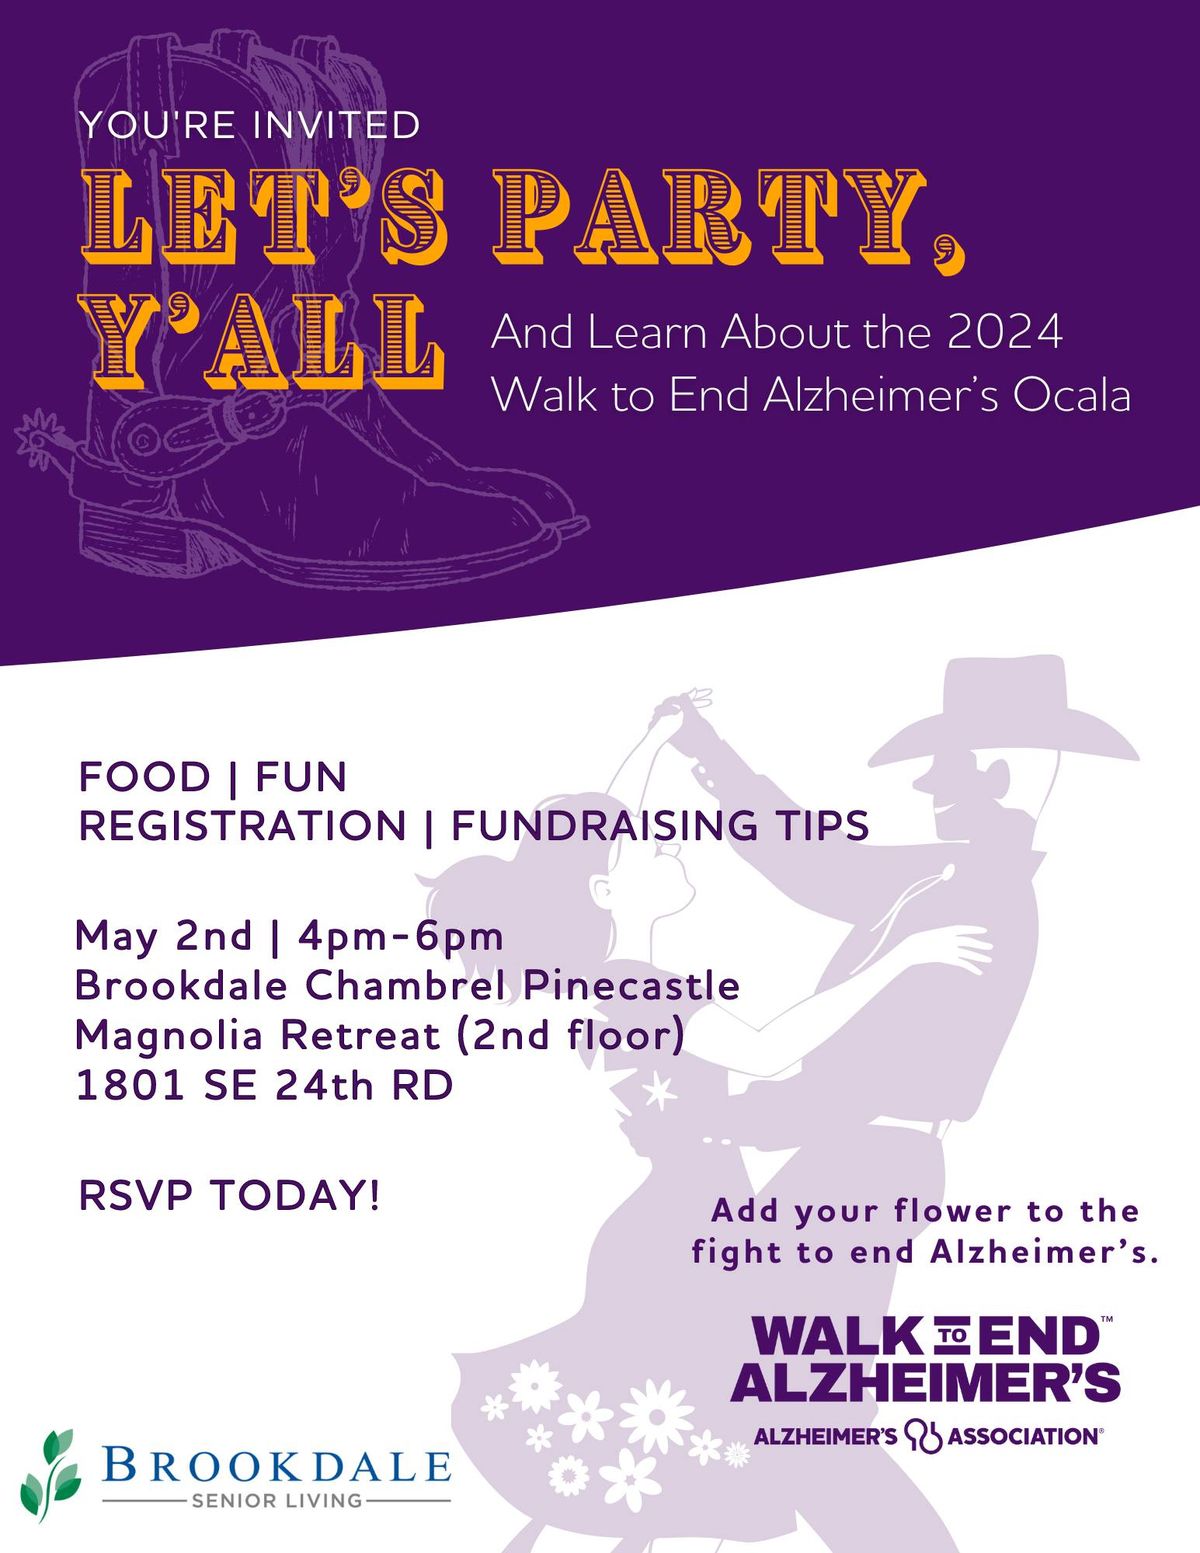 Let's Party Y'all and get ready for the Walk to End Alzheimer's in Ocala